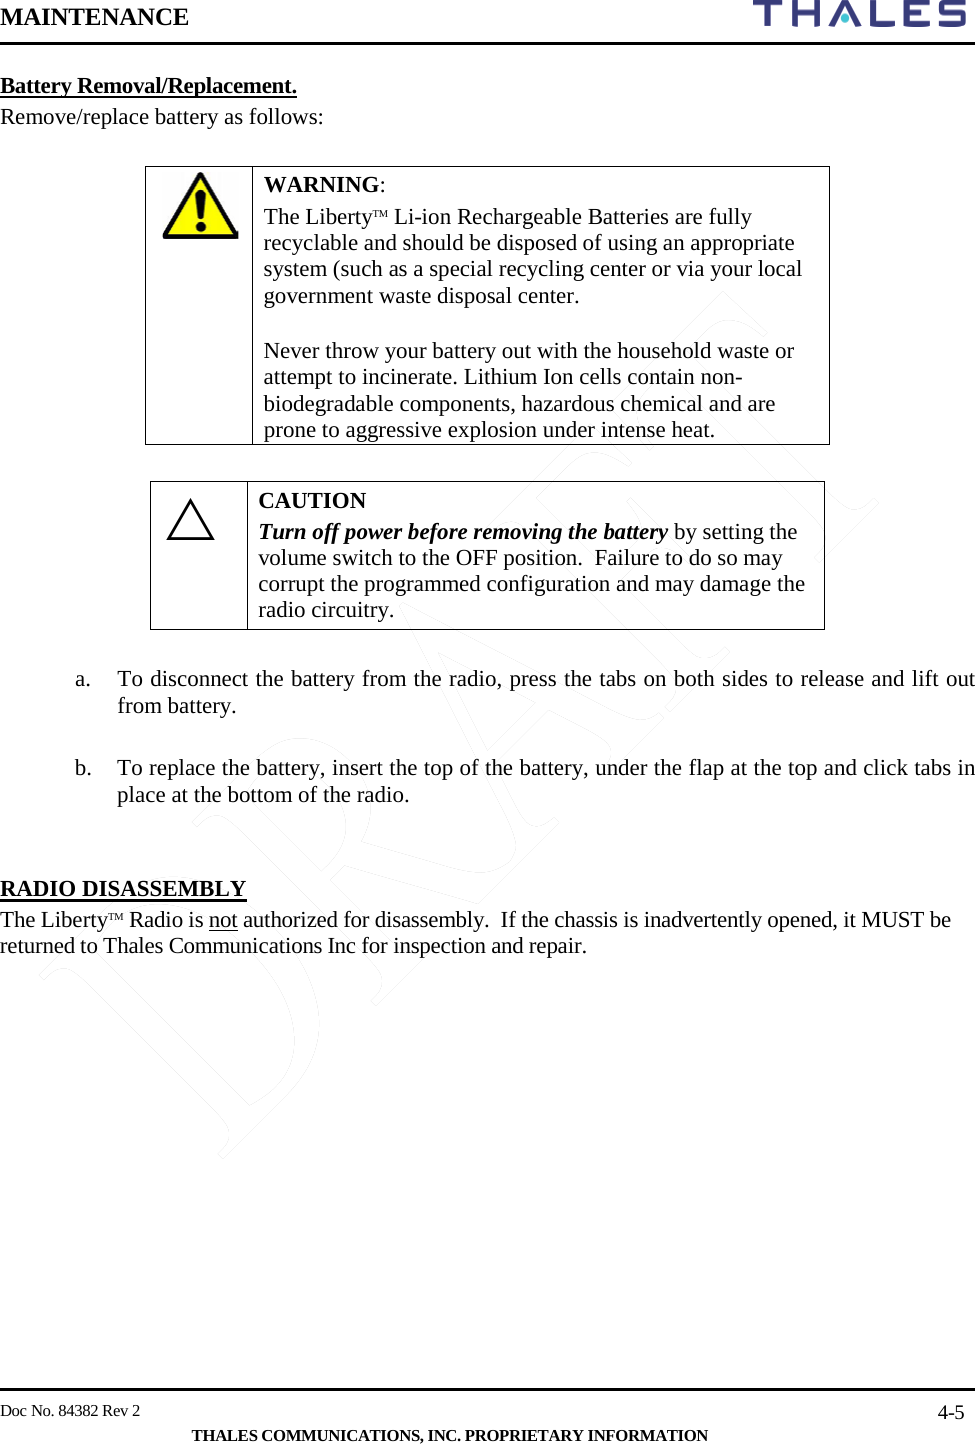 MAINTENANCE       Doc No. 84382 Rev 2   THALES COMMUNICATIONS, INC. PROPRIETARY INFORMATION 4-5 Battery Removal/Replacement.   Remove/replace battery as follows:   WARNING:  The LibertyTM Li-ion Rechargeable Batteries are fully recyclable and should be disposed of using an appropriate system (such as a special recycling center or via your local government waste disposal center. Never throw your battery out with the household waste or attempt to incinerate. Lithium Ion cells contain non-biodegradable components, hazardous chemical and are prone to aggressive explosion under intense heat.   CAUTION Turn off power before removing the battery by setting the volume switch to the OFF position.  Failure to do so may corrupt the programmed configuration and may damage the radio circuitry.  a. To disconnect the battery from the radio, press the tabs on both sides to release and lift out from battery.   b. To replace the battery, insert the top of the battery, under the flap at the top and click tabs in place at the bottom of the radio.    RADIO DISASSEMBLY  The LibertyTM Radio is not authorized for disassembly.  If the chassis is inadvertently opened, it MUST be returned to Thales Communications Inc for inspection and repair.       